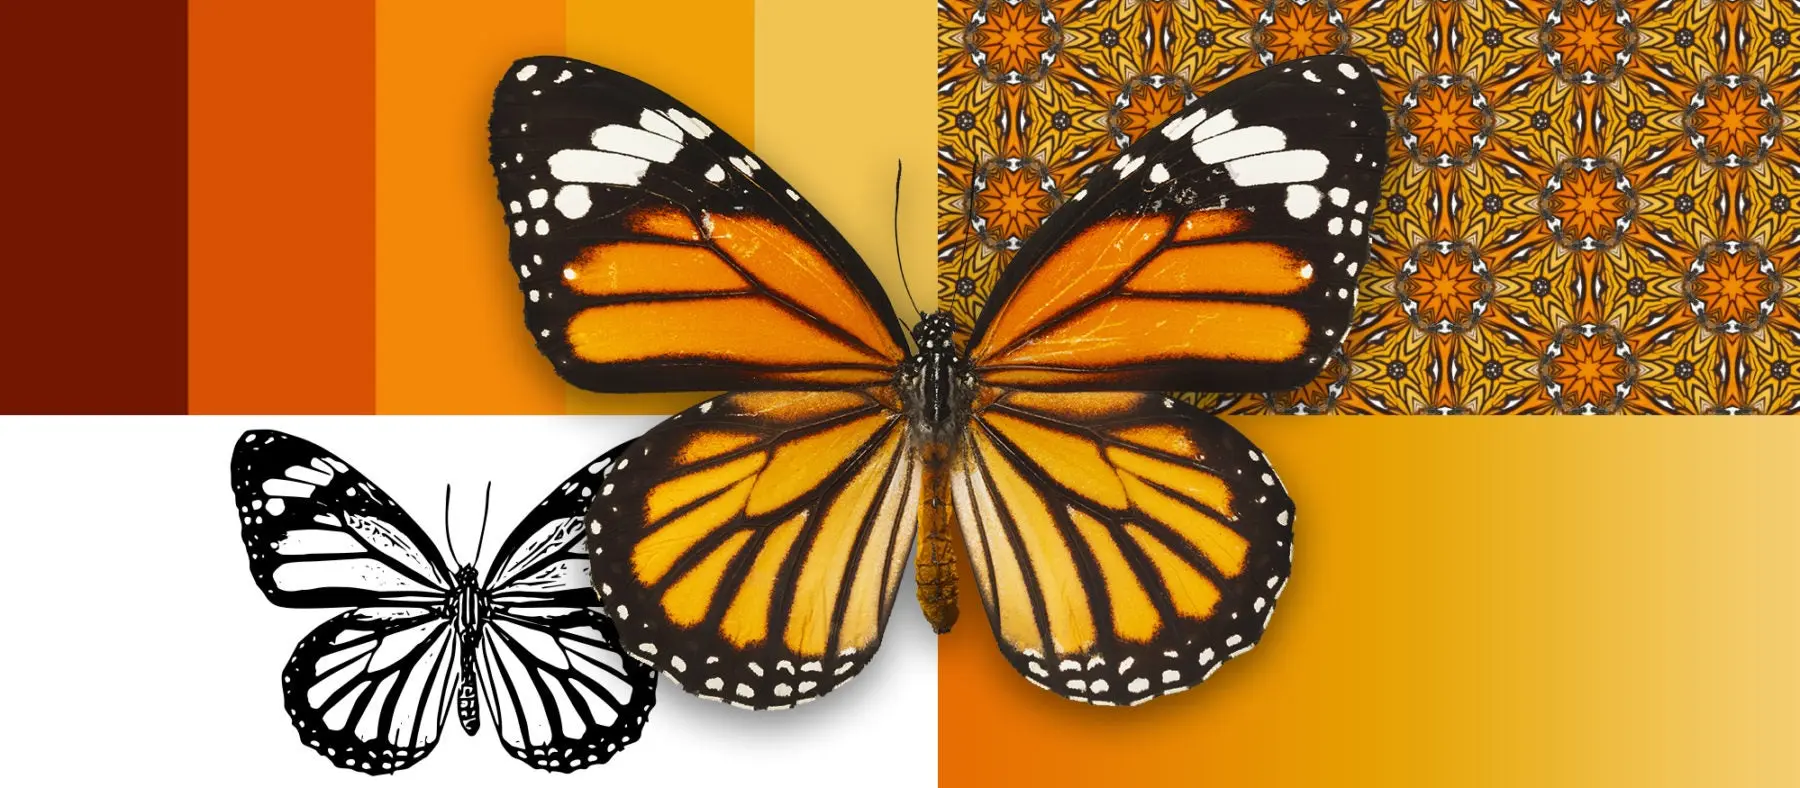 An example of Adobe Capture's ability to grab textures and colors from a butterfly to create patterns and vector shapes.